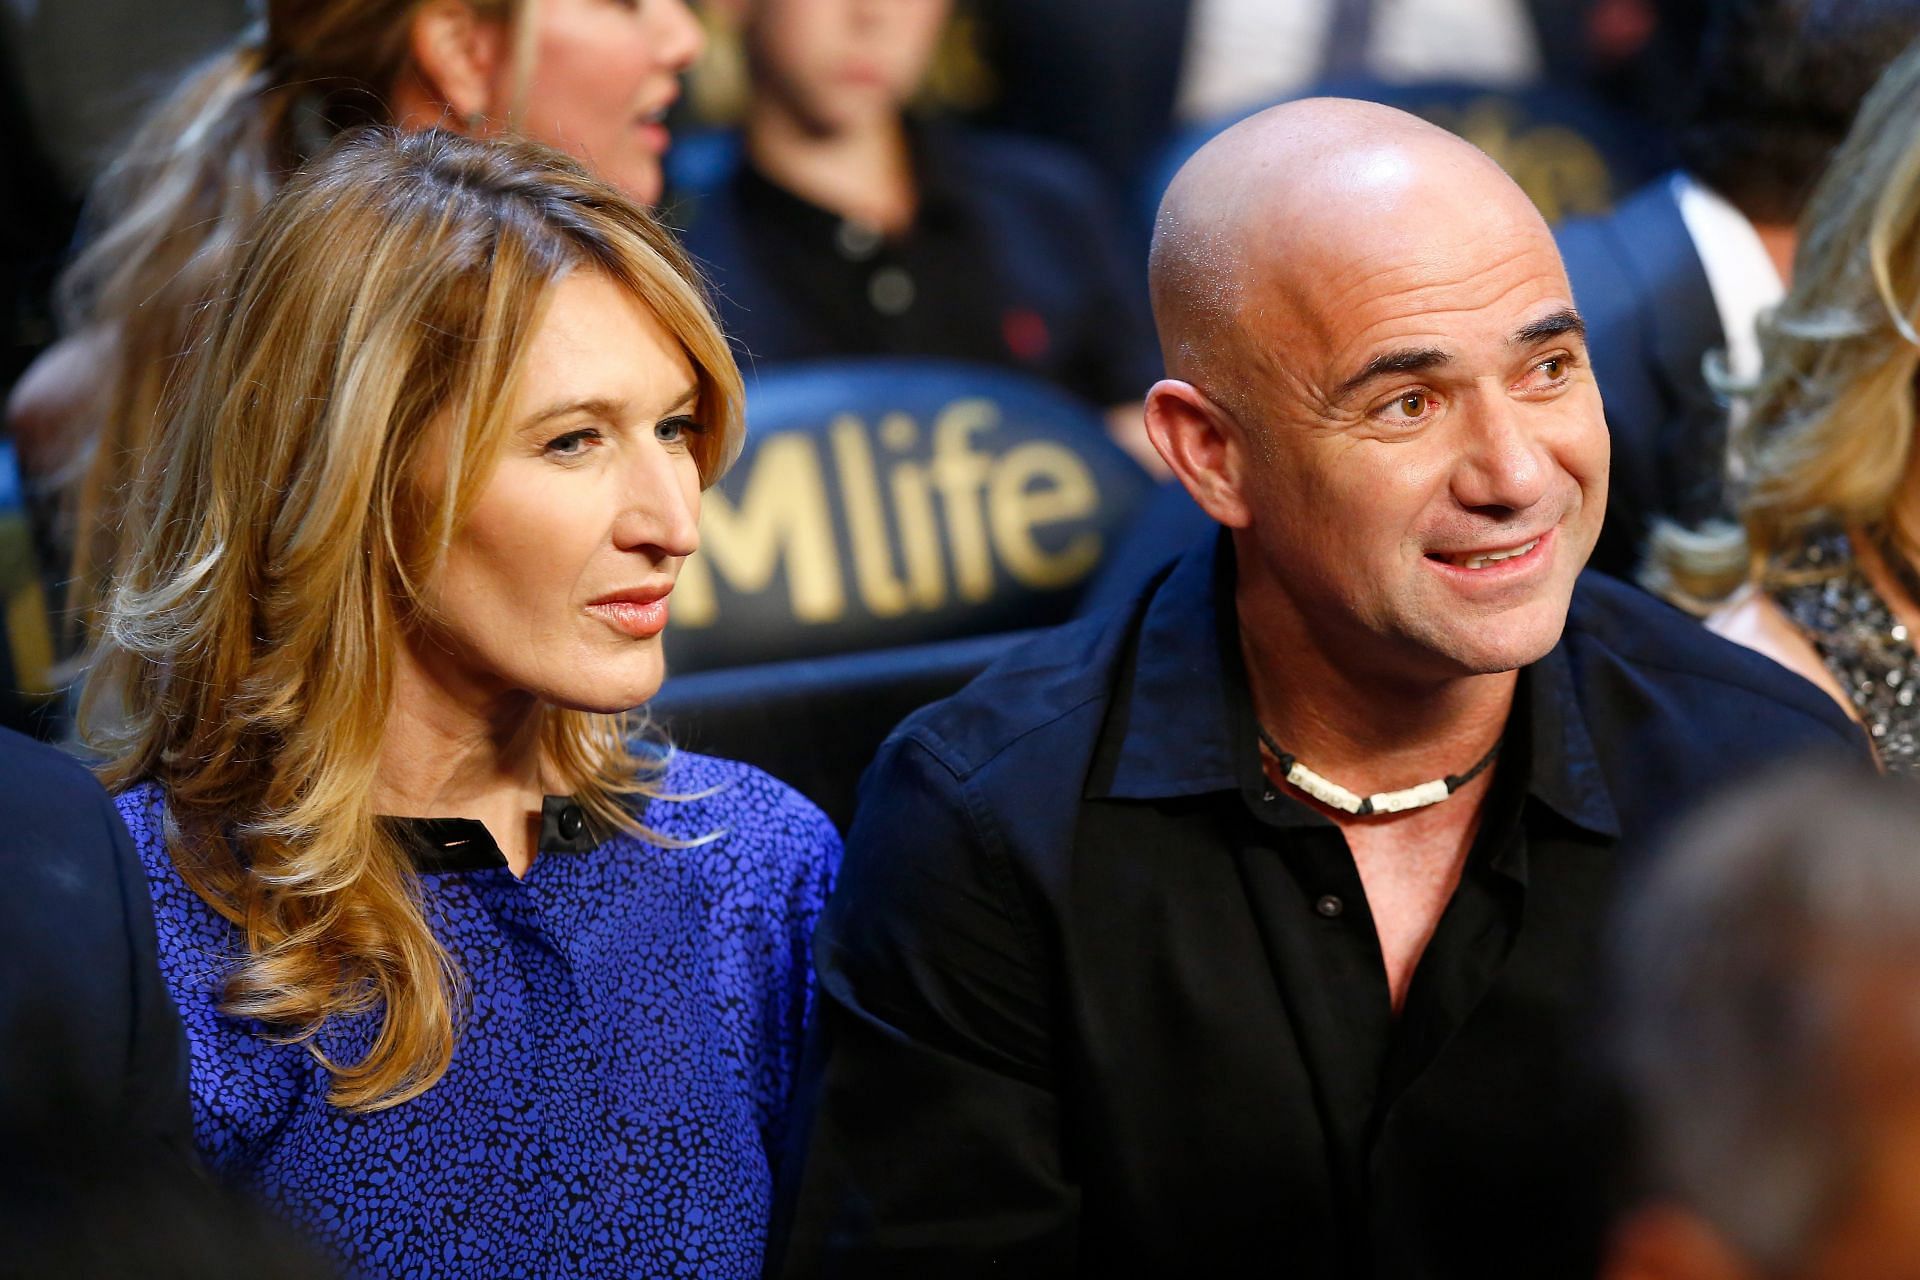 Andre Agassi and Steffi Graf got married in 1999.